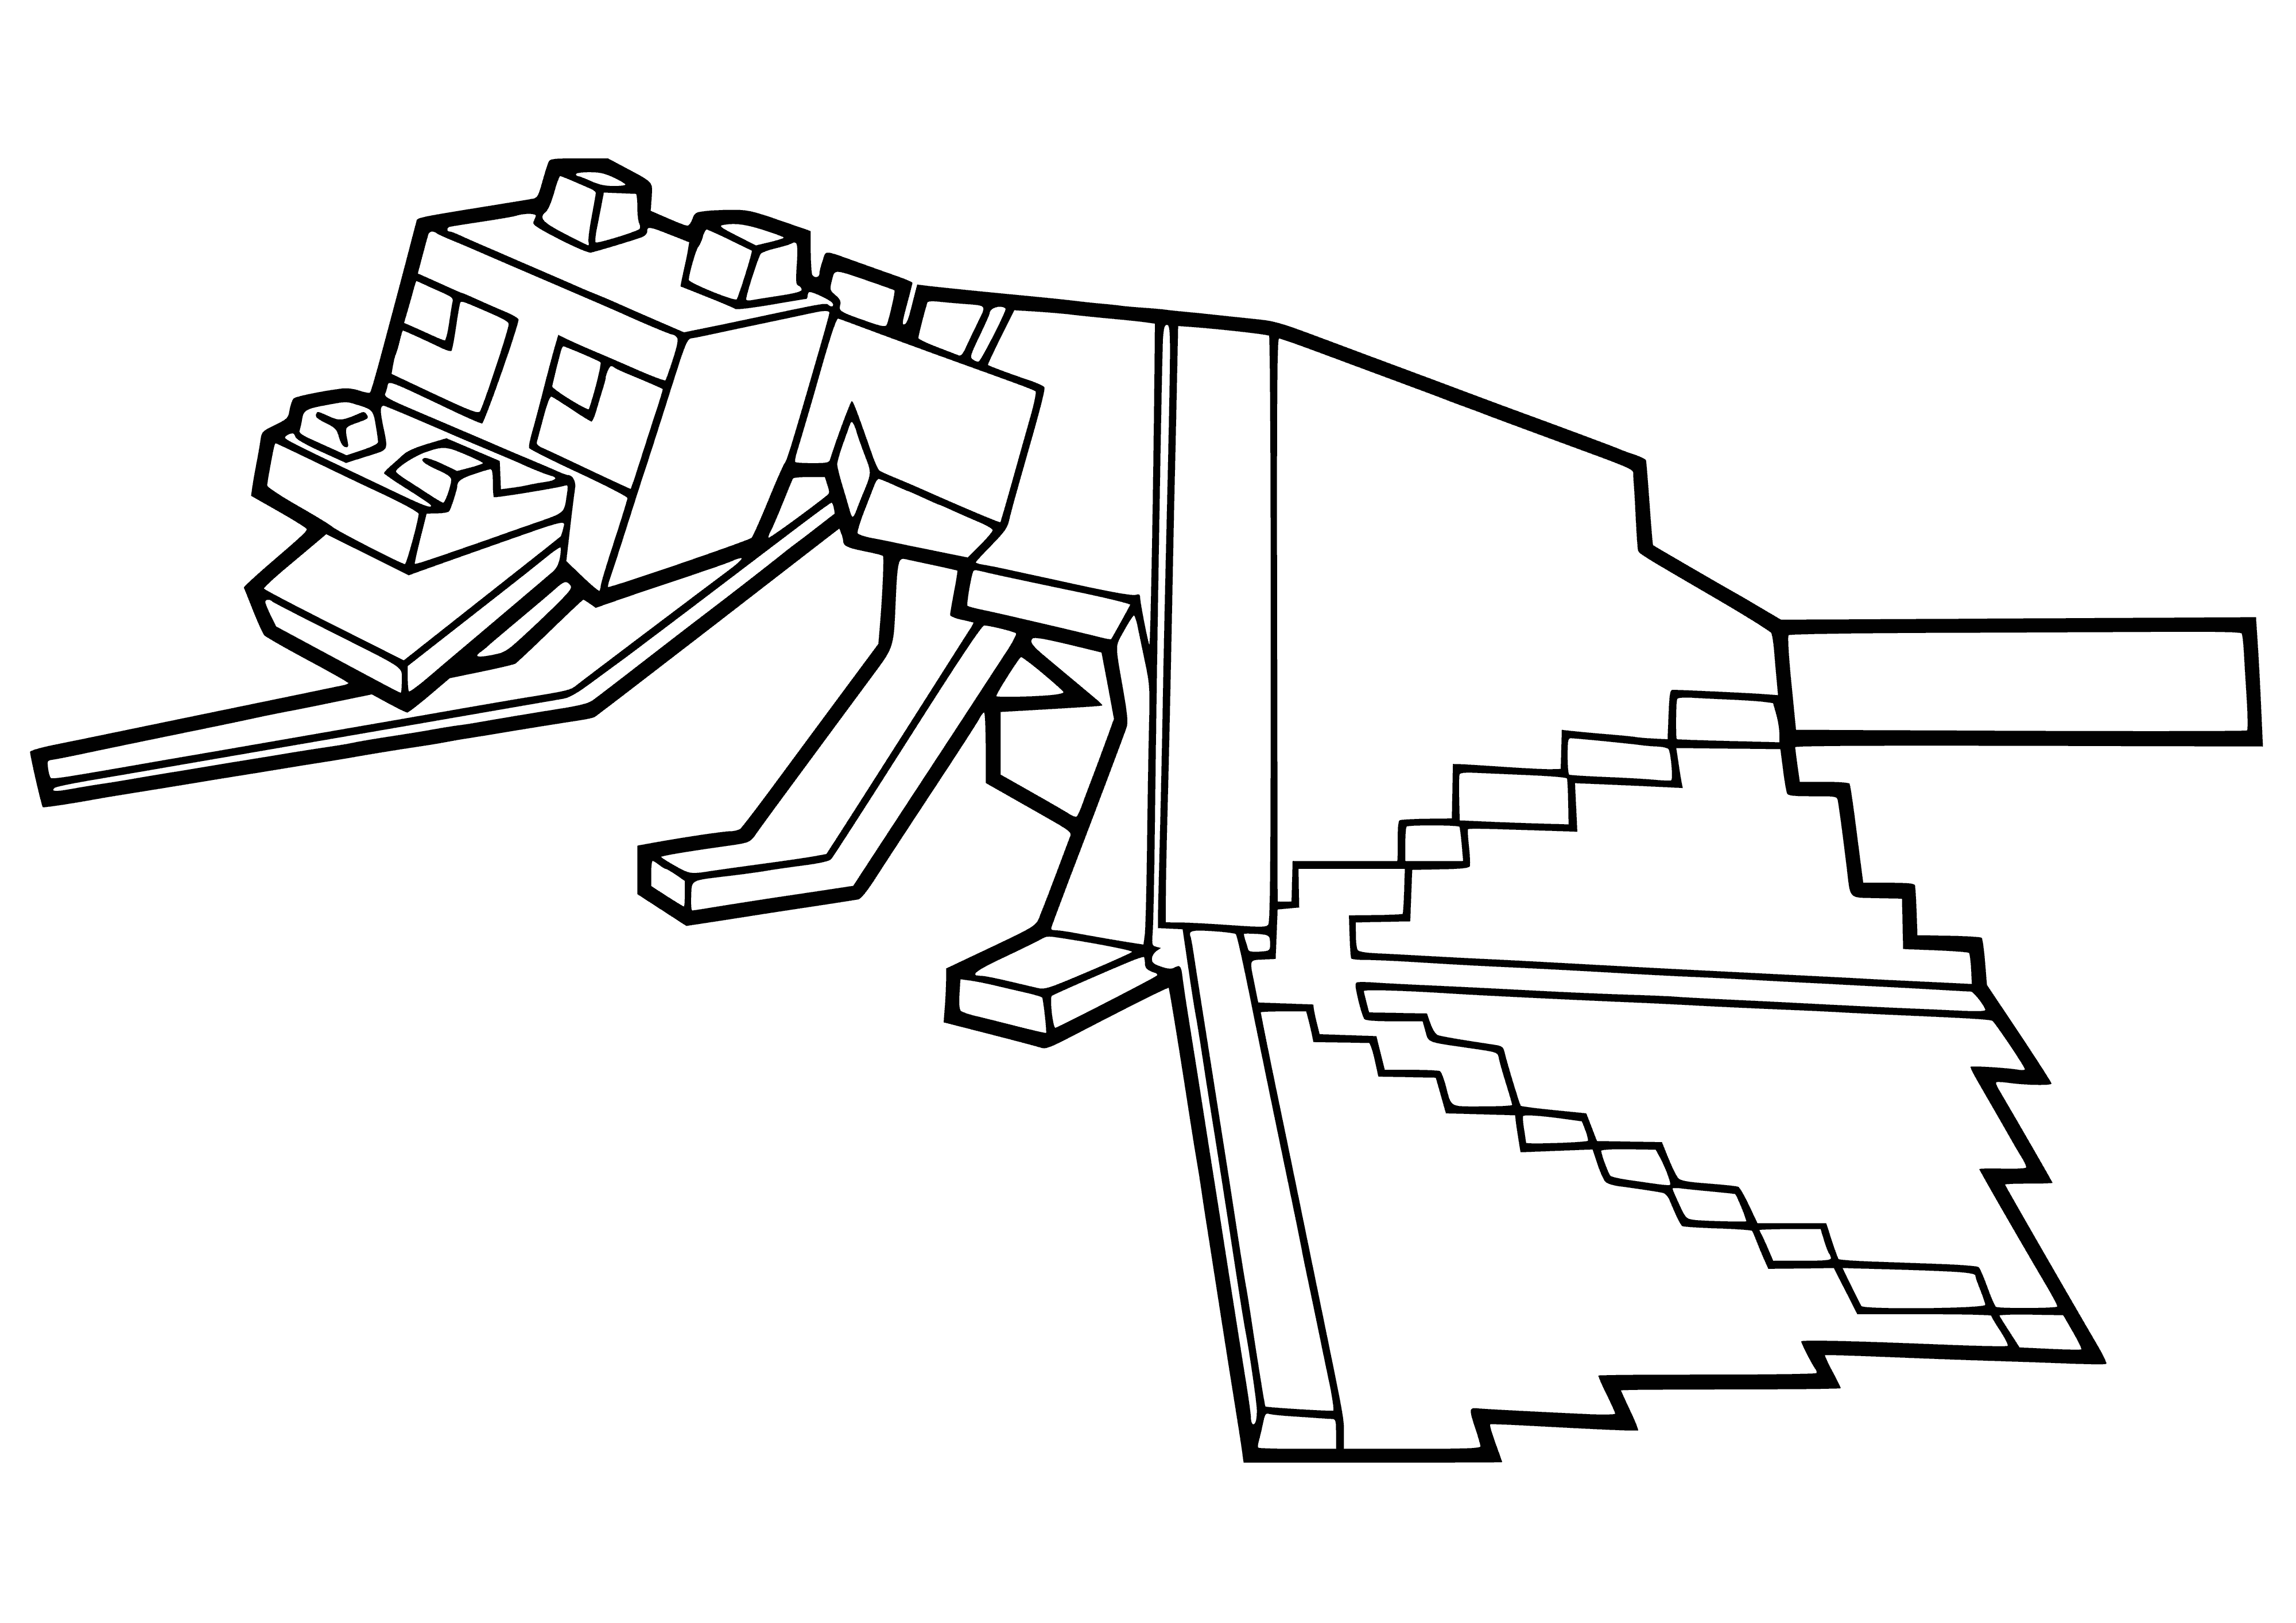 Ender's Dragon coloring page